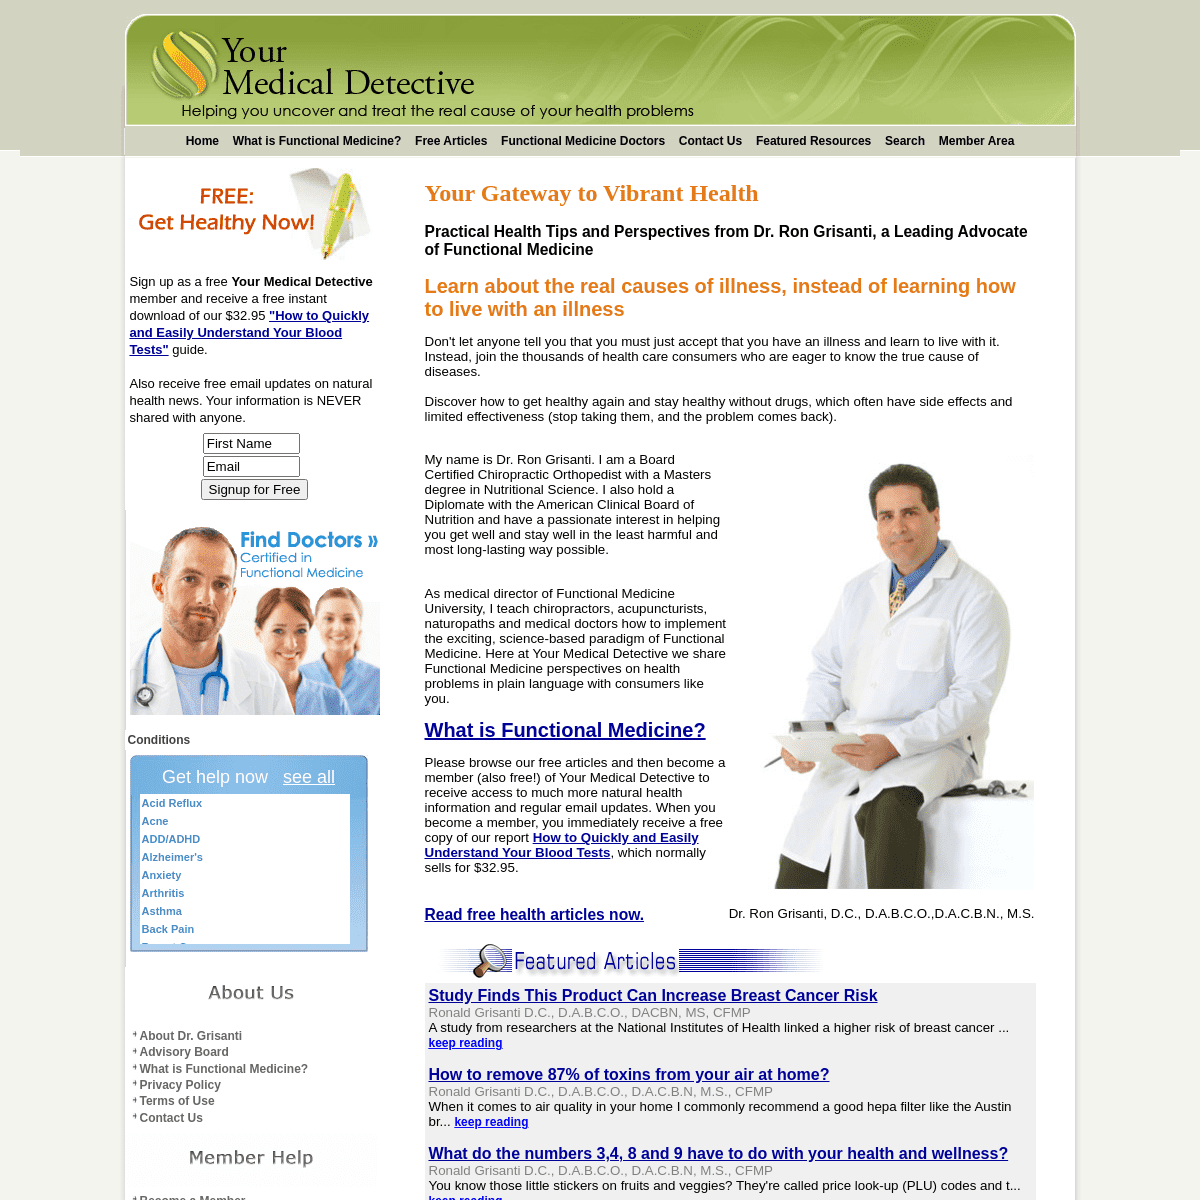 A complete backup of https://yourmedicaldetective.com